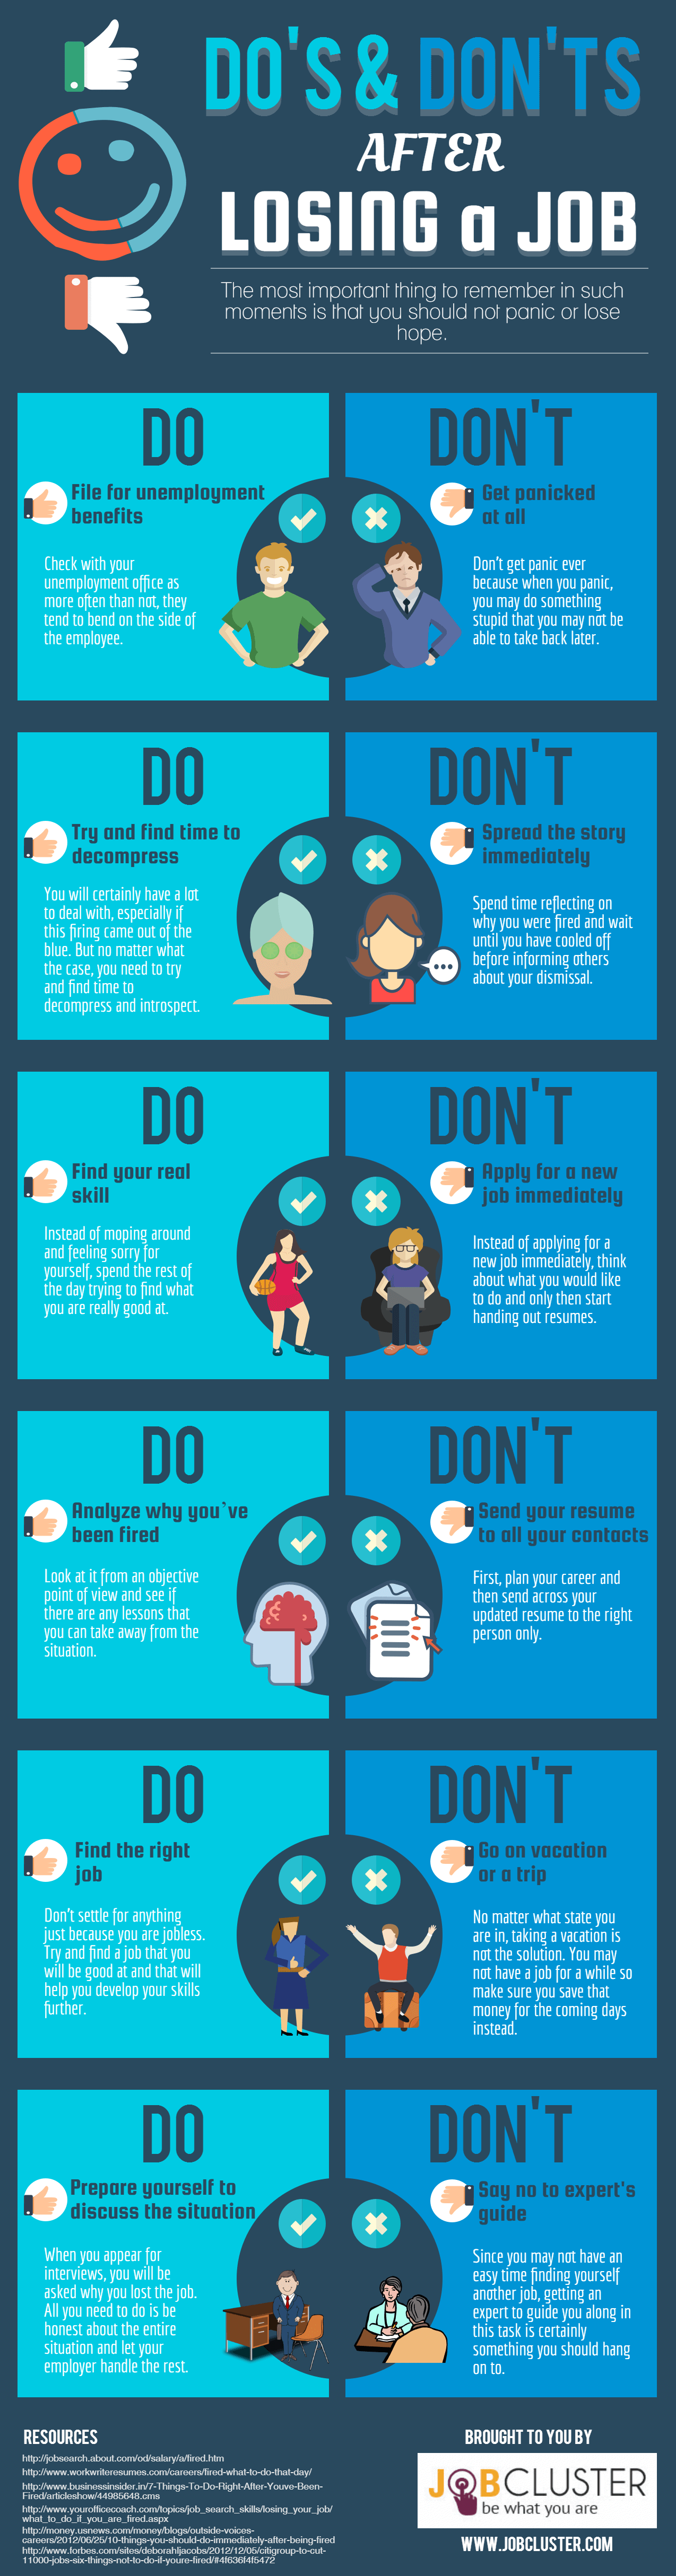 Do's and Don'ts After Losing a Job- Infographic